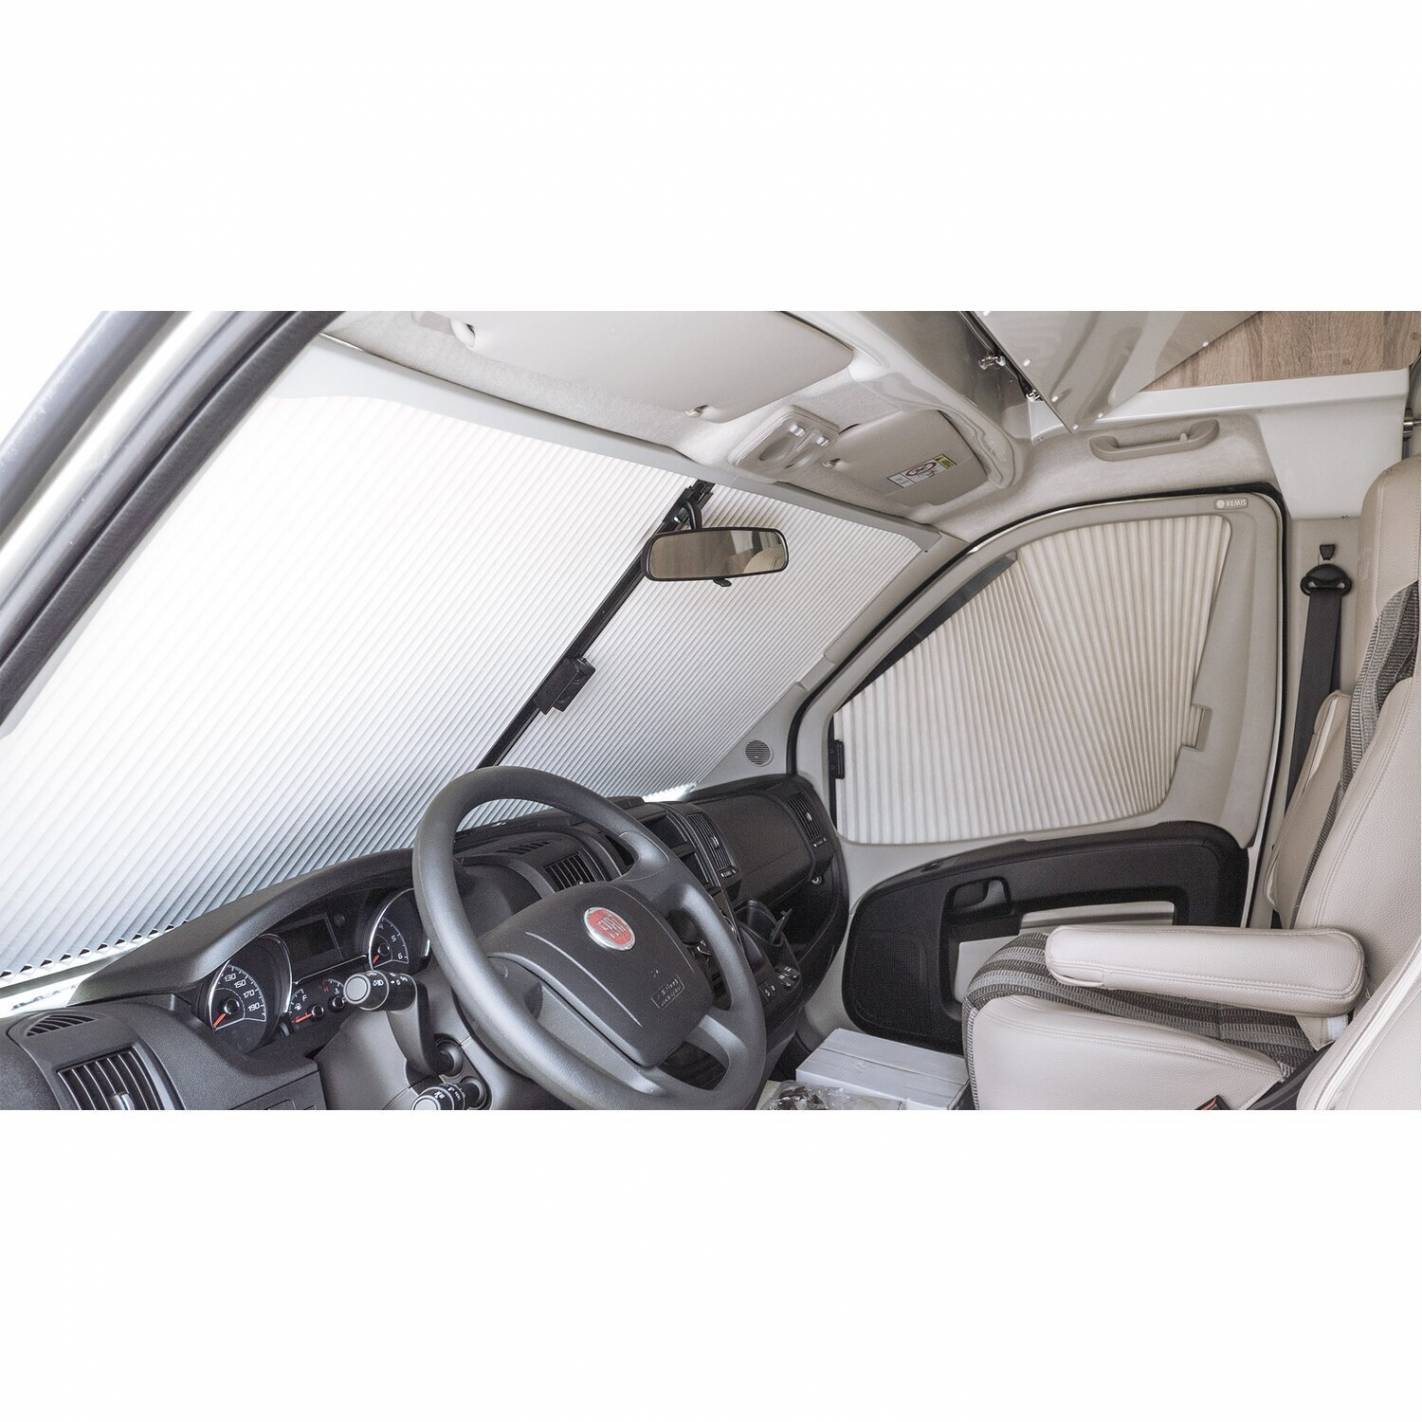 Volet isolation PROTECT Ducato 250/290 depuis 2007